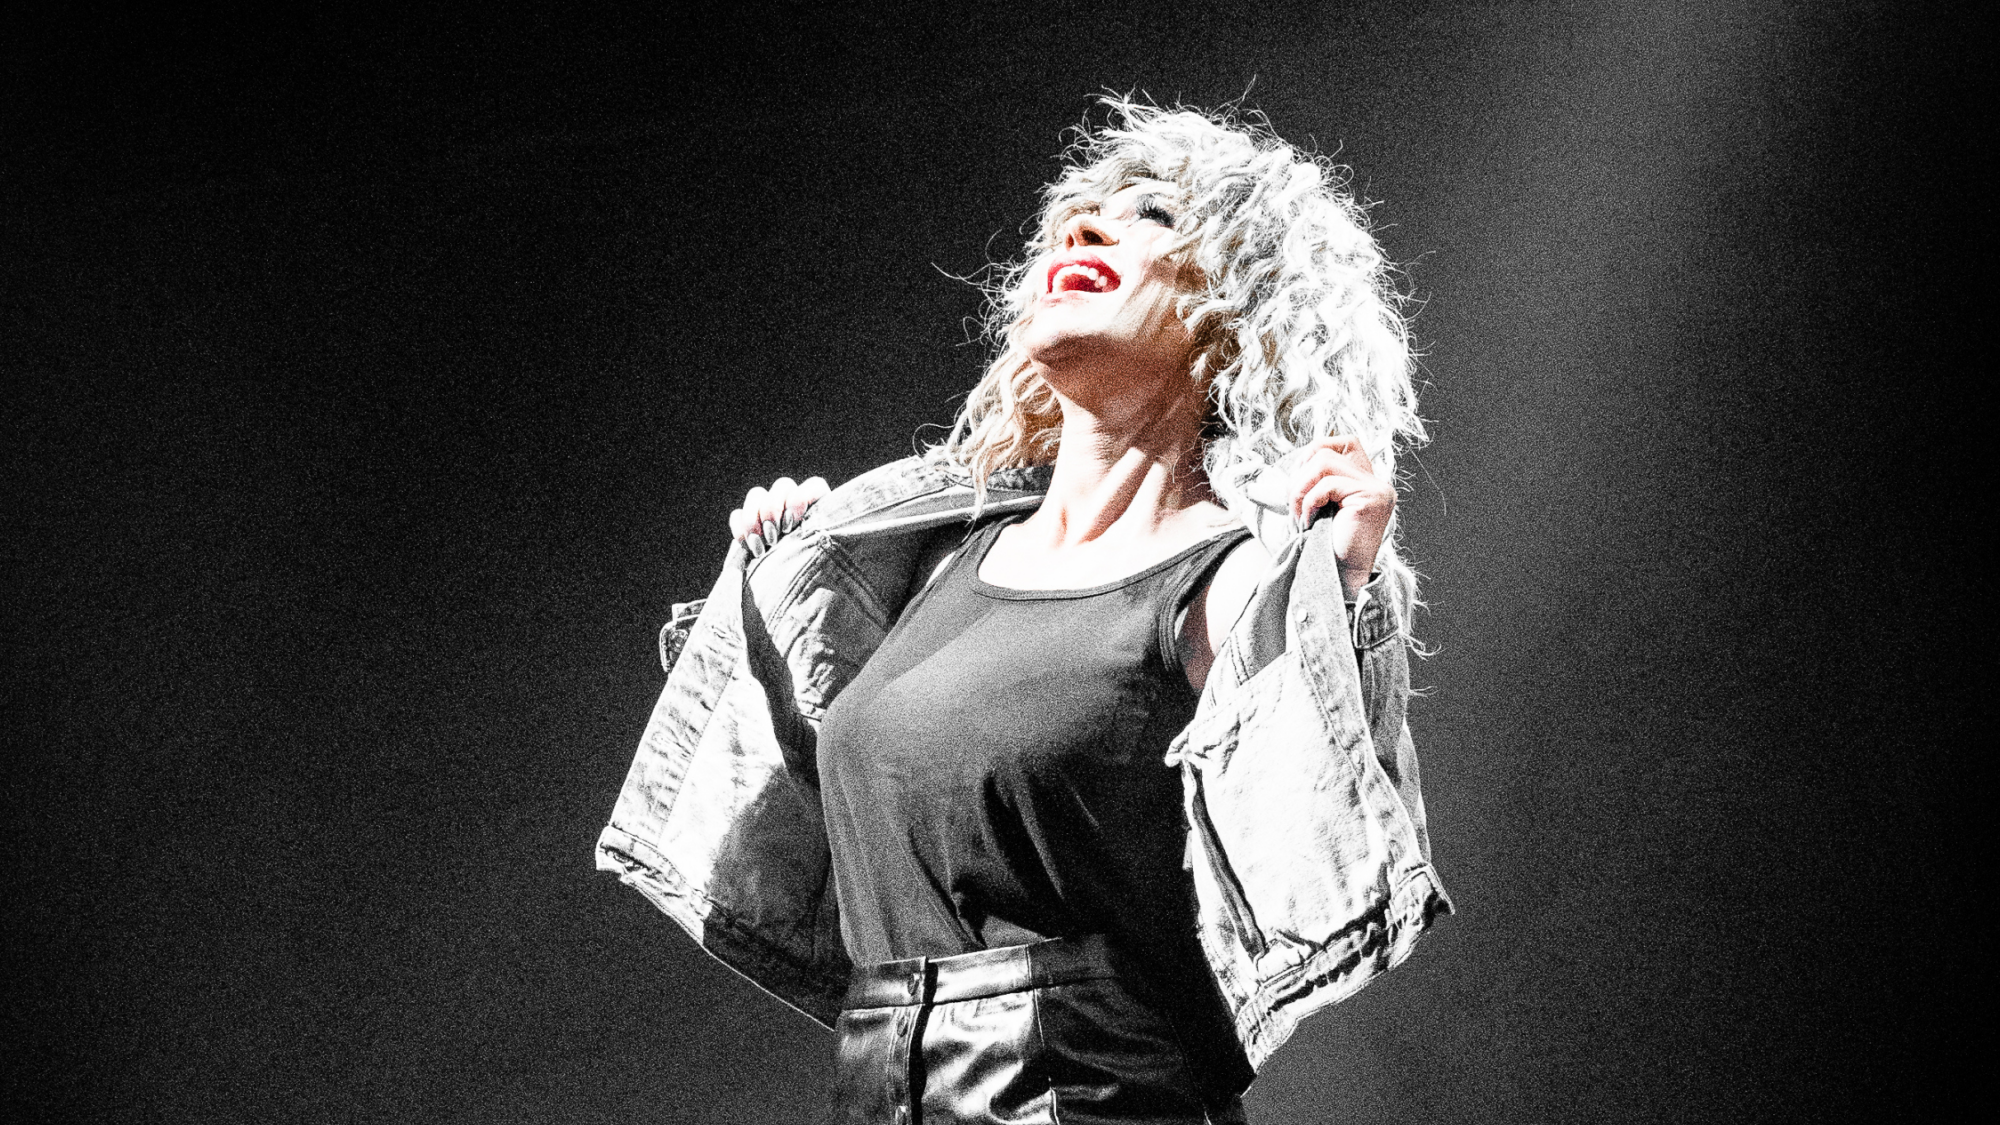 Image name Whats Love Got to do With it Tina Turner Tribute at York Barbican York the 16 image from the post What's Love Got To Do With It? at The Royal Hall, Harrogate in Yorkshire.com.